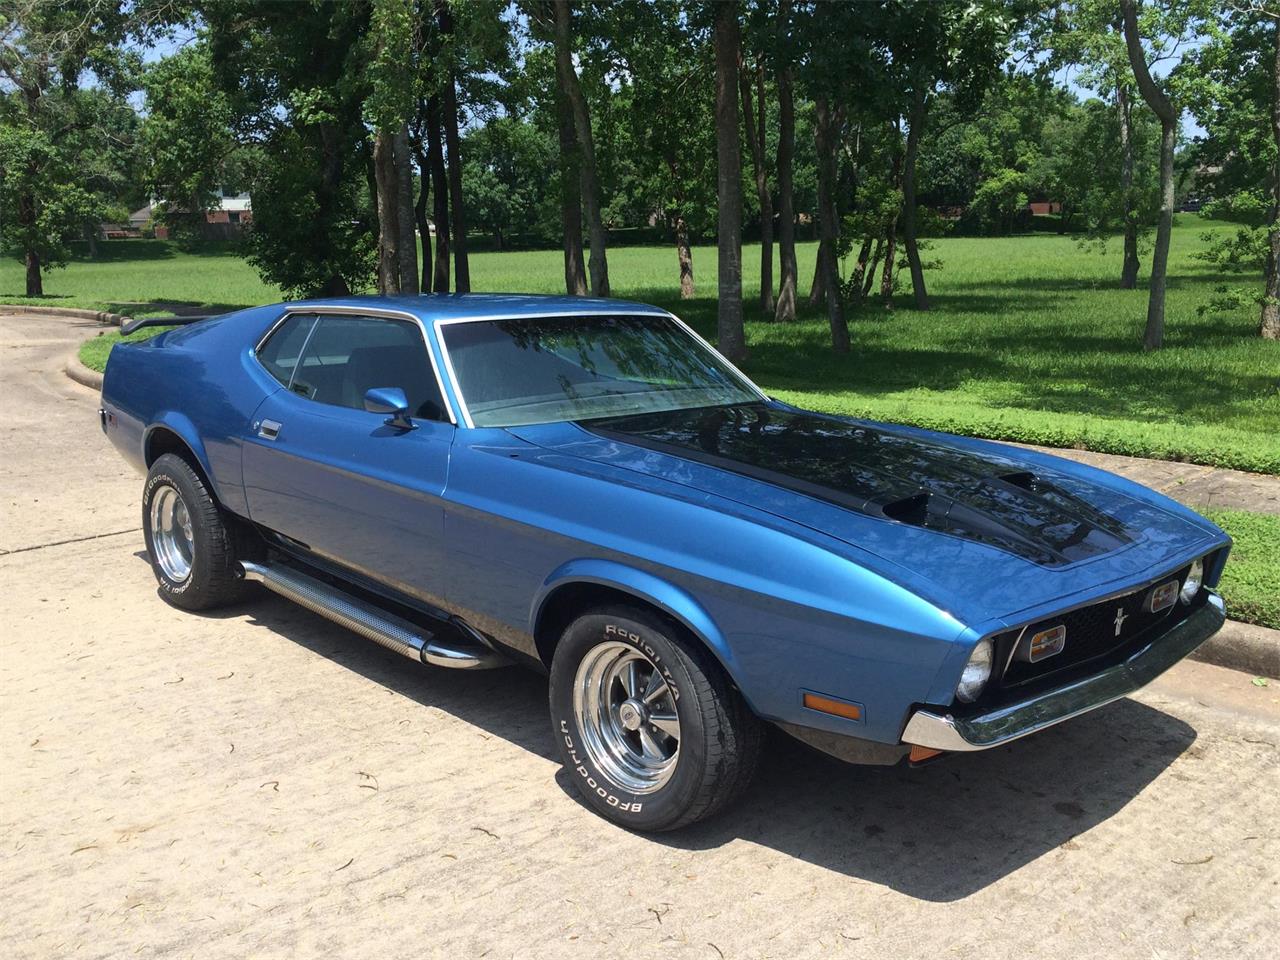 1972 Ford Mustang Mach 1 for Sale | ClassicCars.com | CC-897455